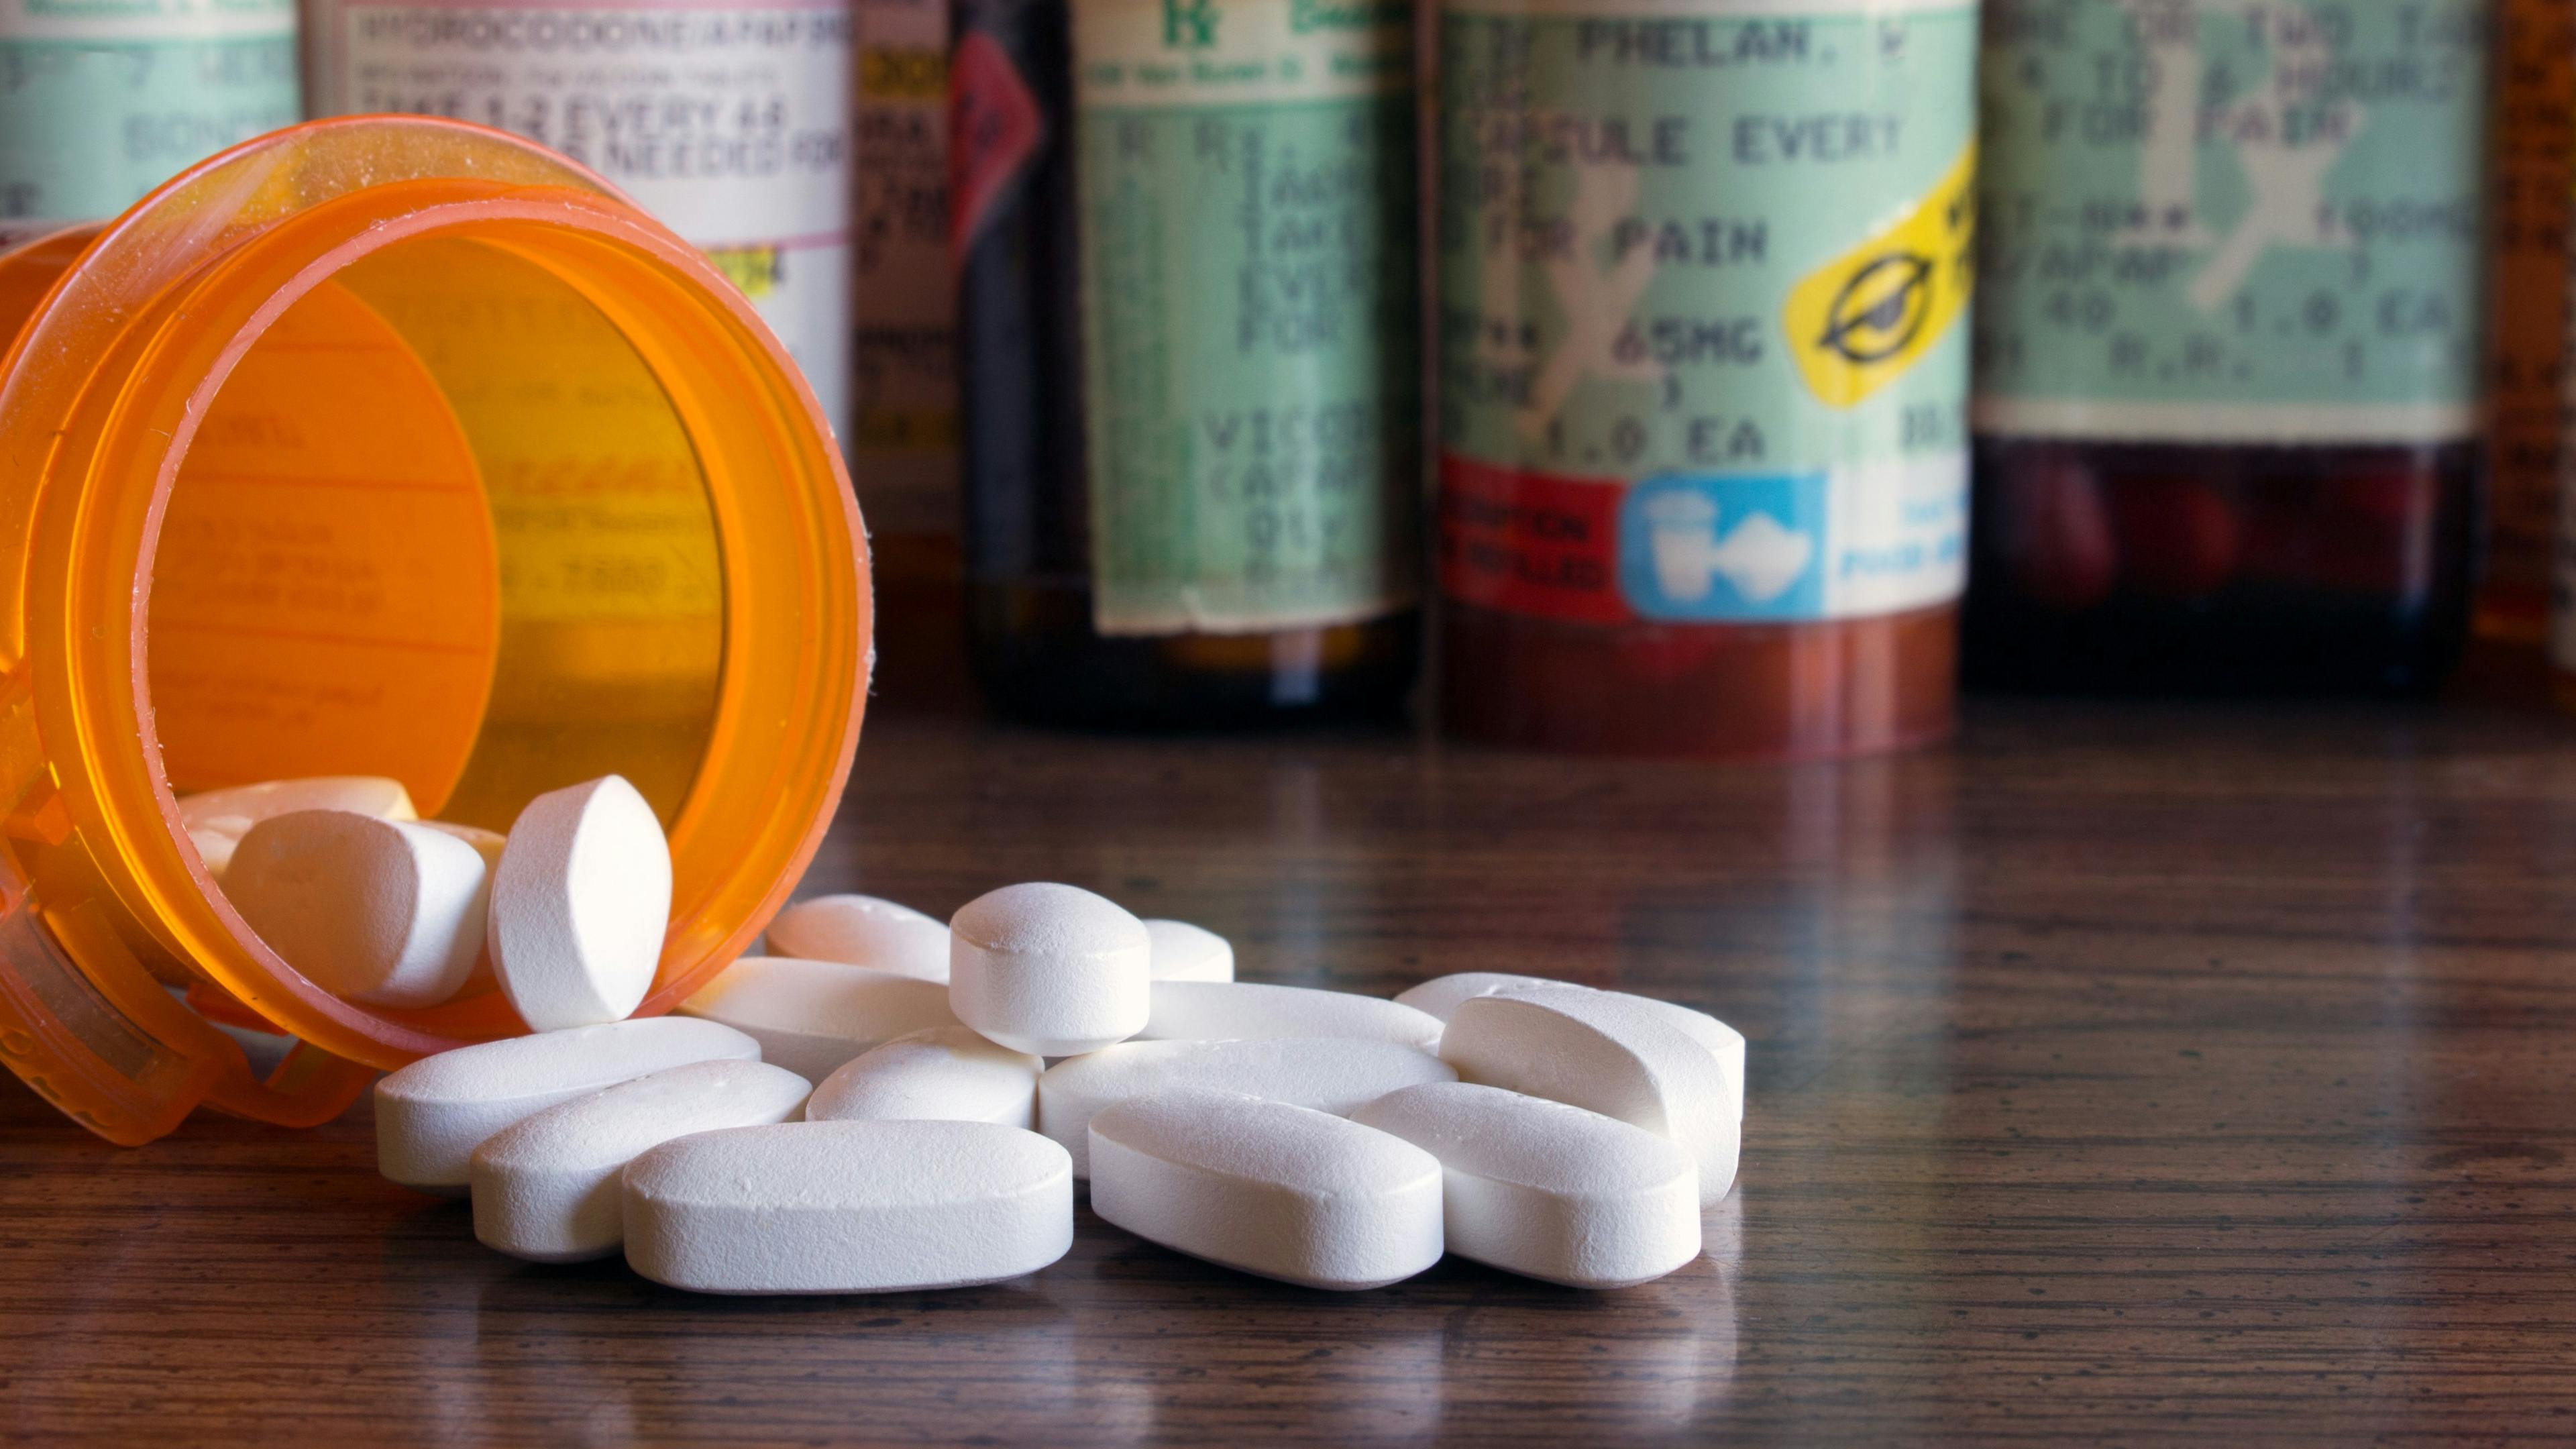 Benzodiazepines increase drug overdose risk in youth